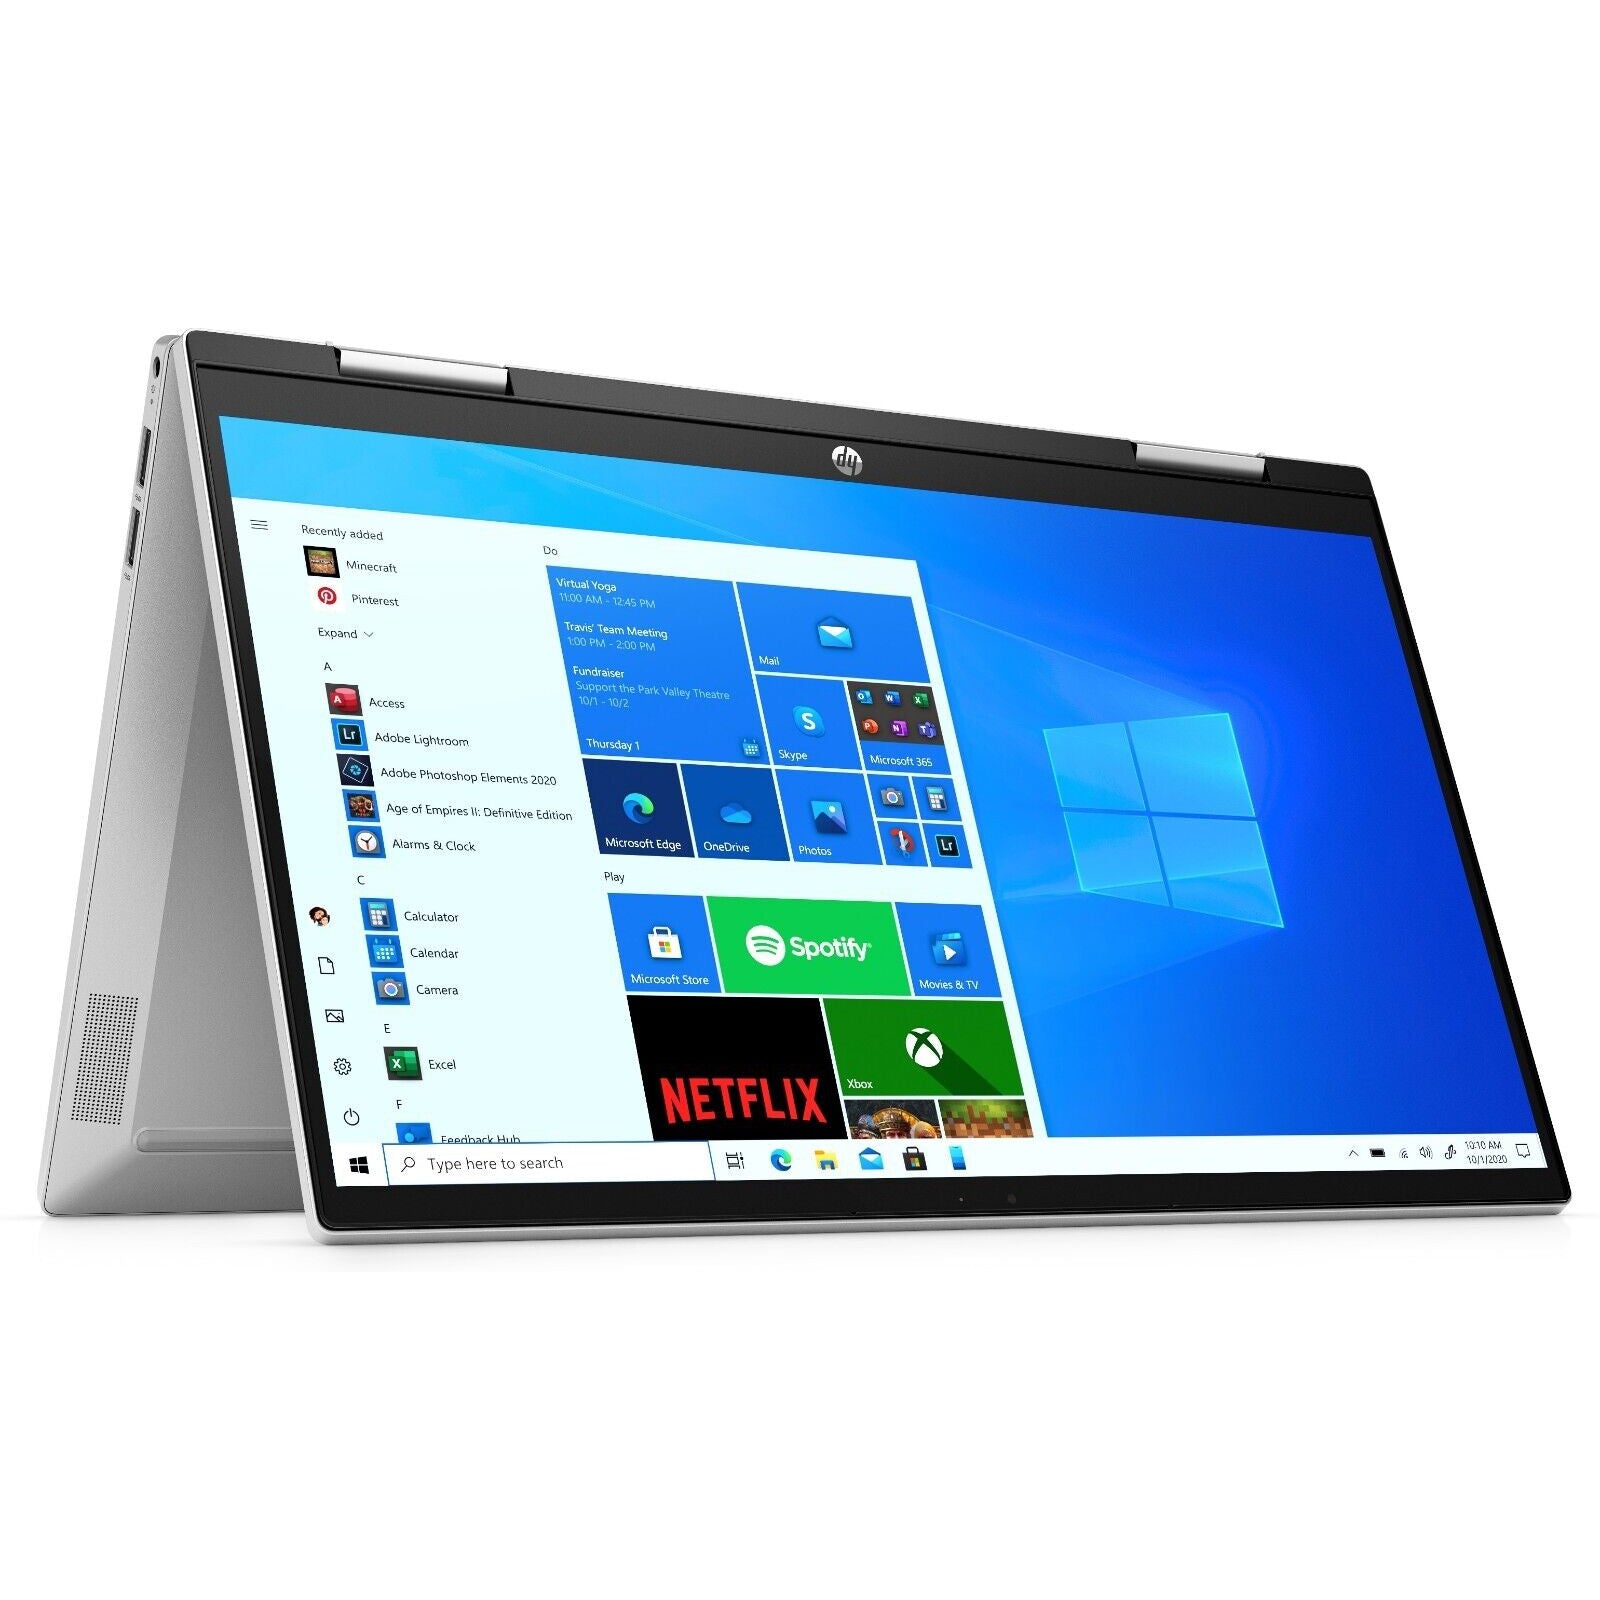 HP Pavilion x360 14-dy0505sa 14in Touch Intel Core i3 4GB Memory 256GB Storage